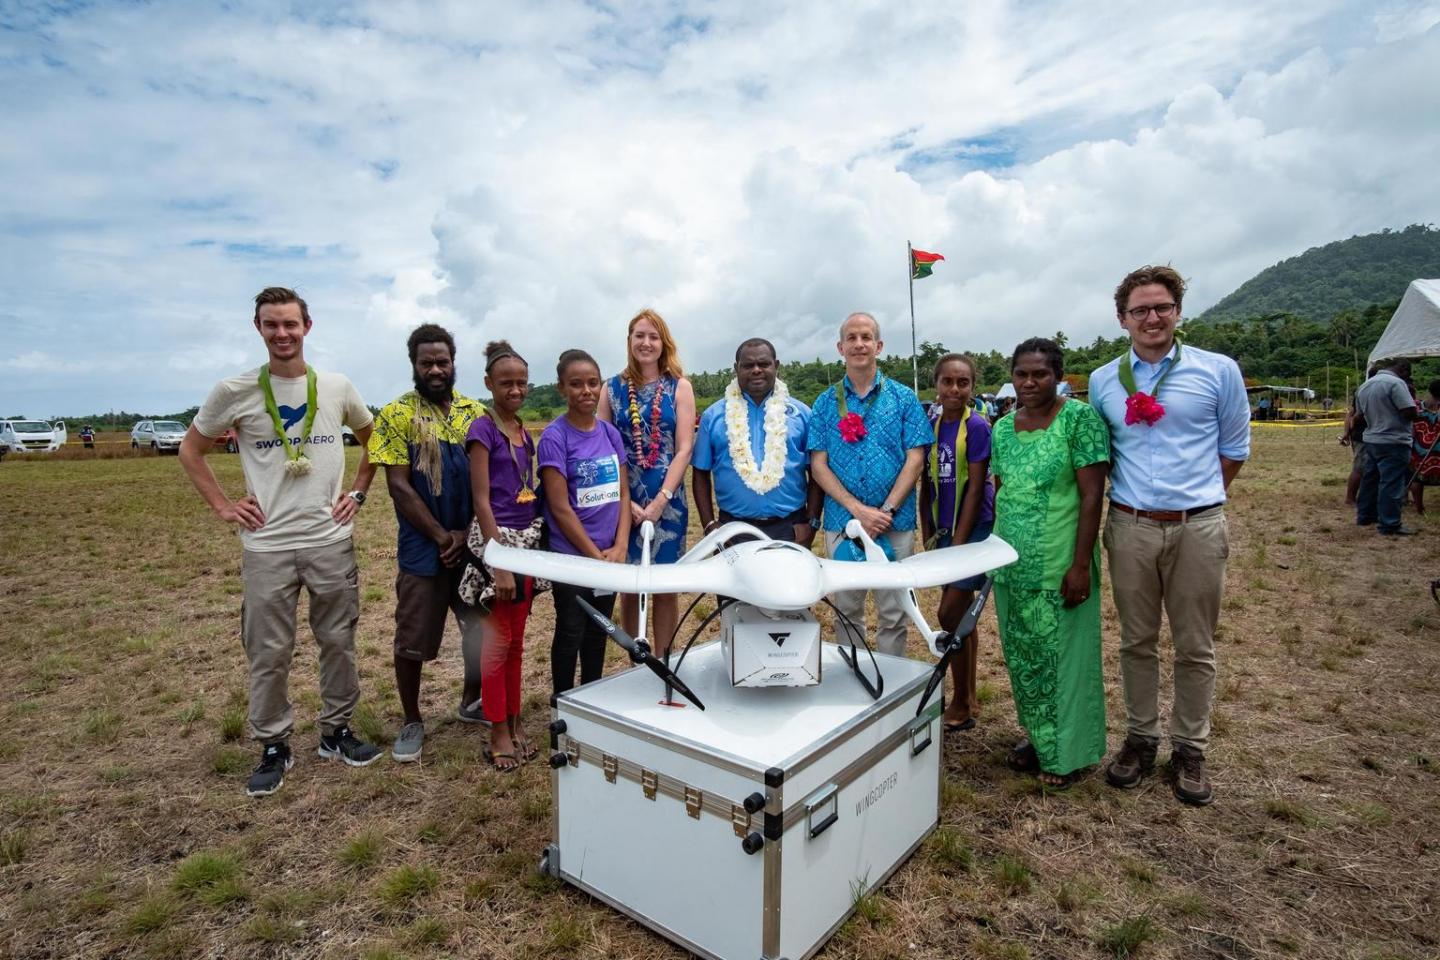 A group of ten people are standing in a field. A drone is placed in front of them on top of a crate.